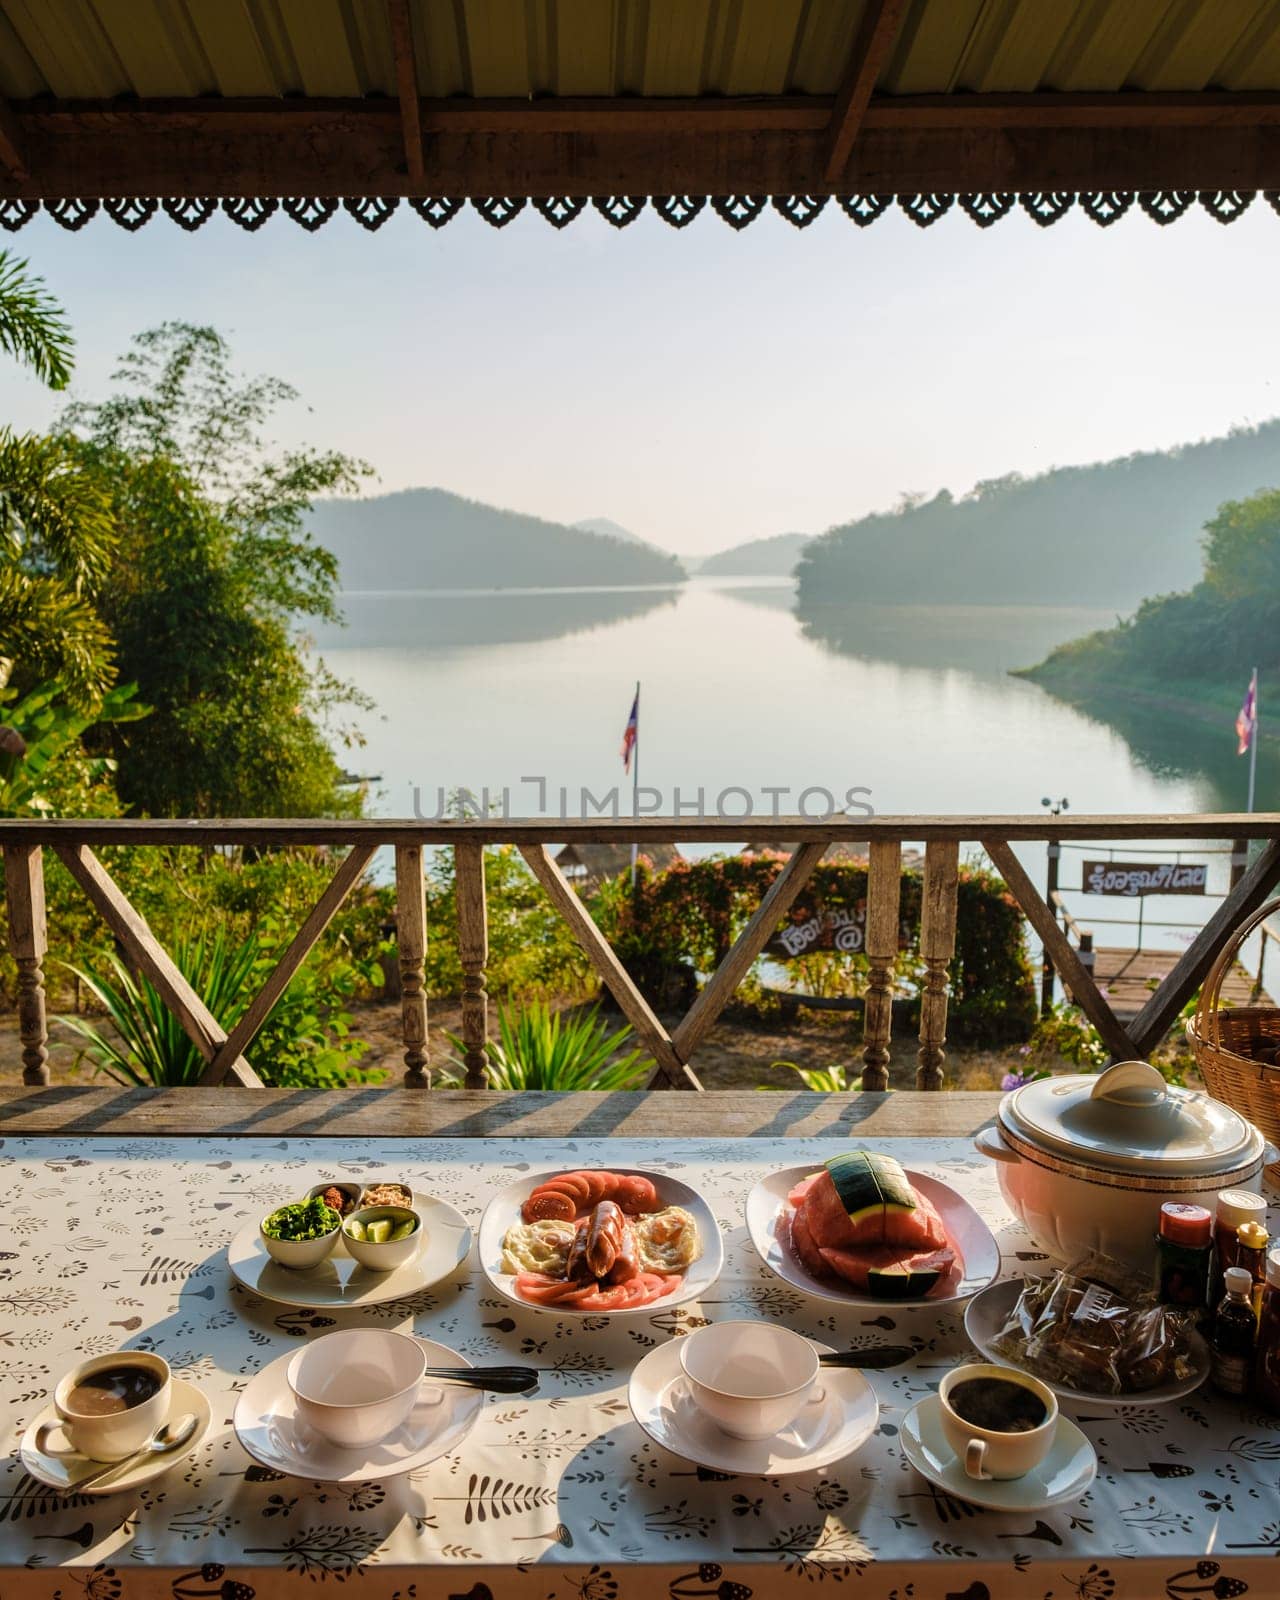 Breakfast from a wooden bungalow with a view at Huai Krathing lake in North Eastern Thailand Isaan.